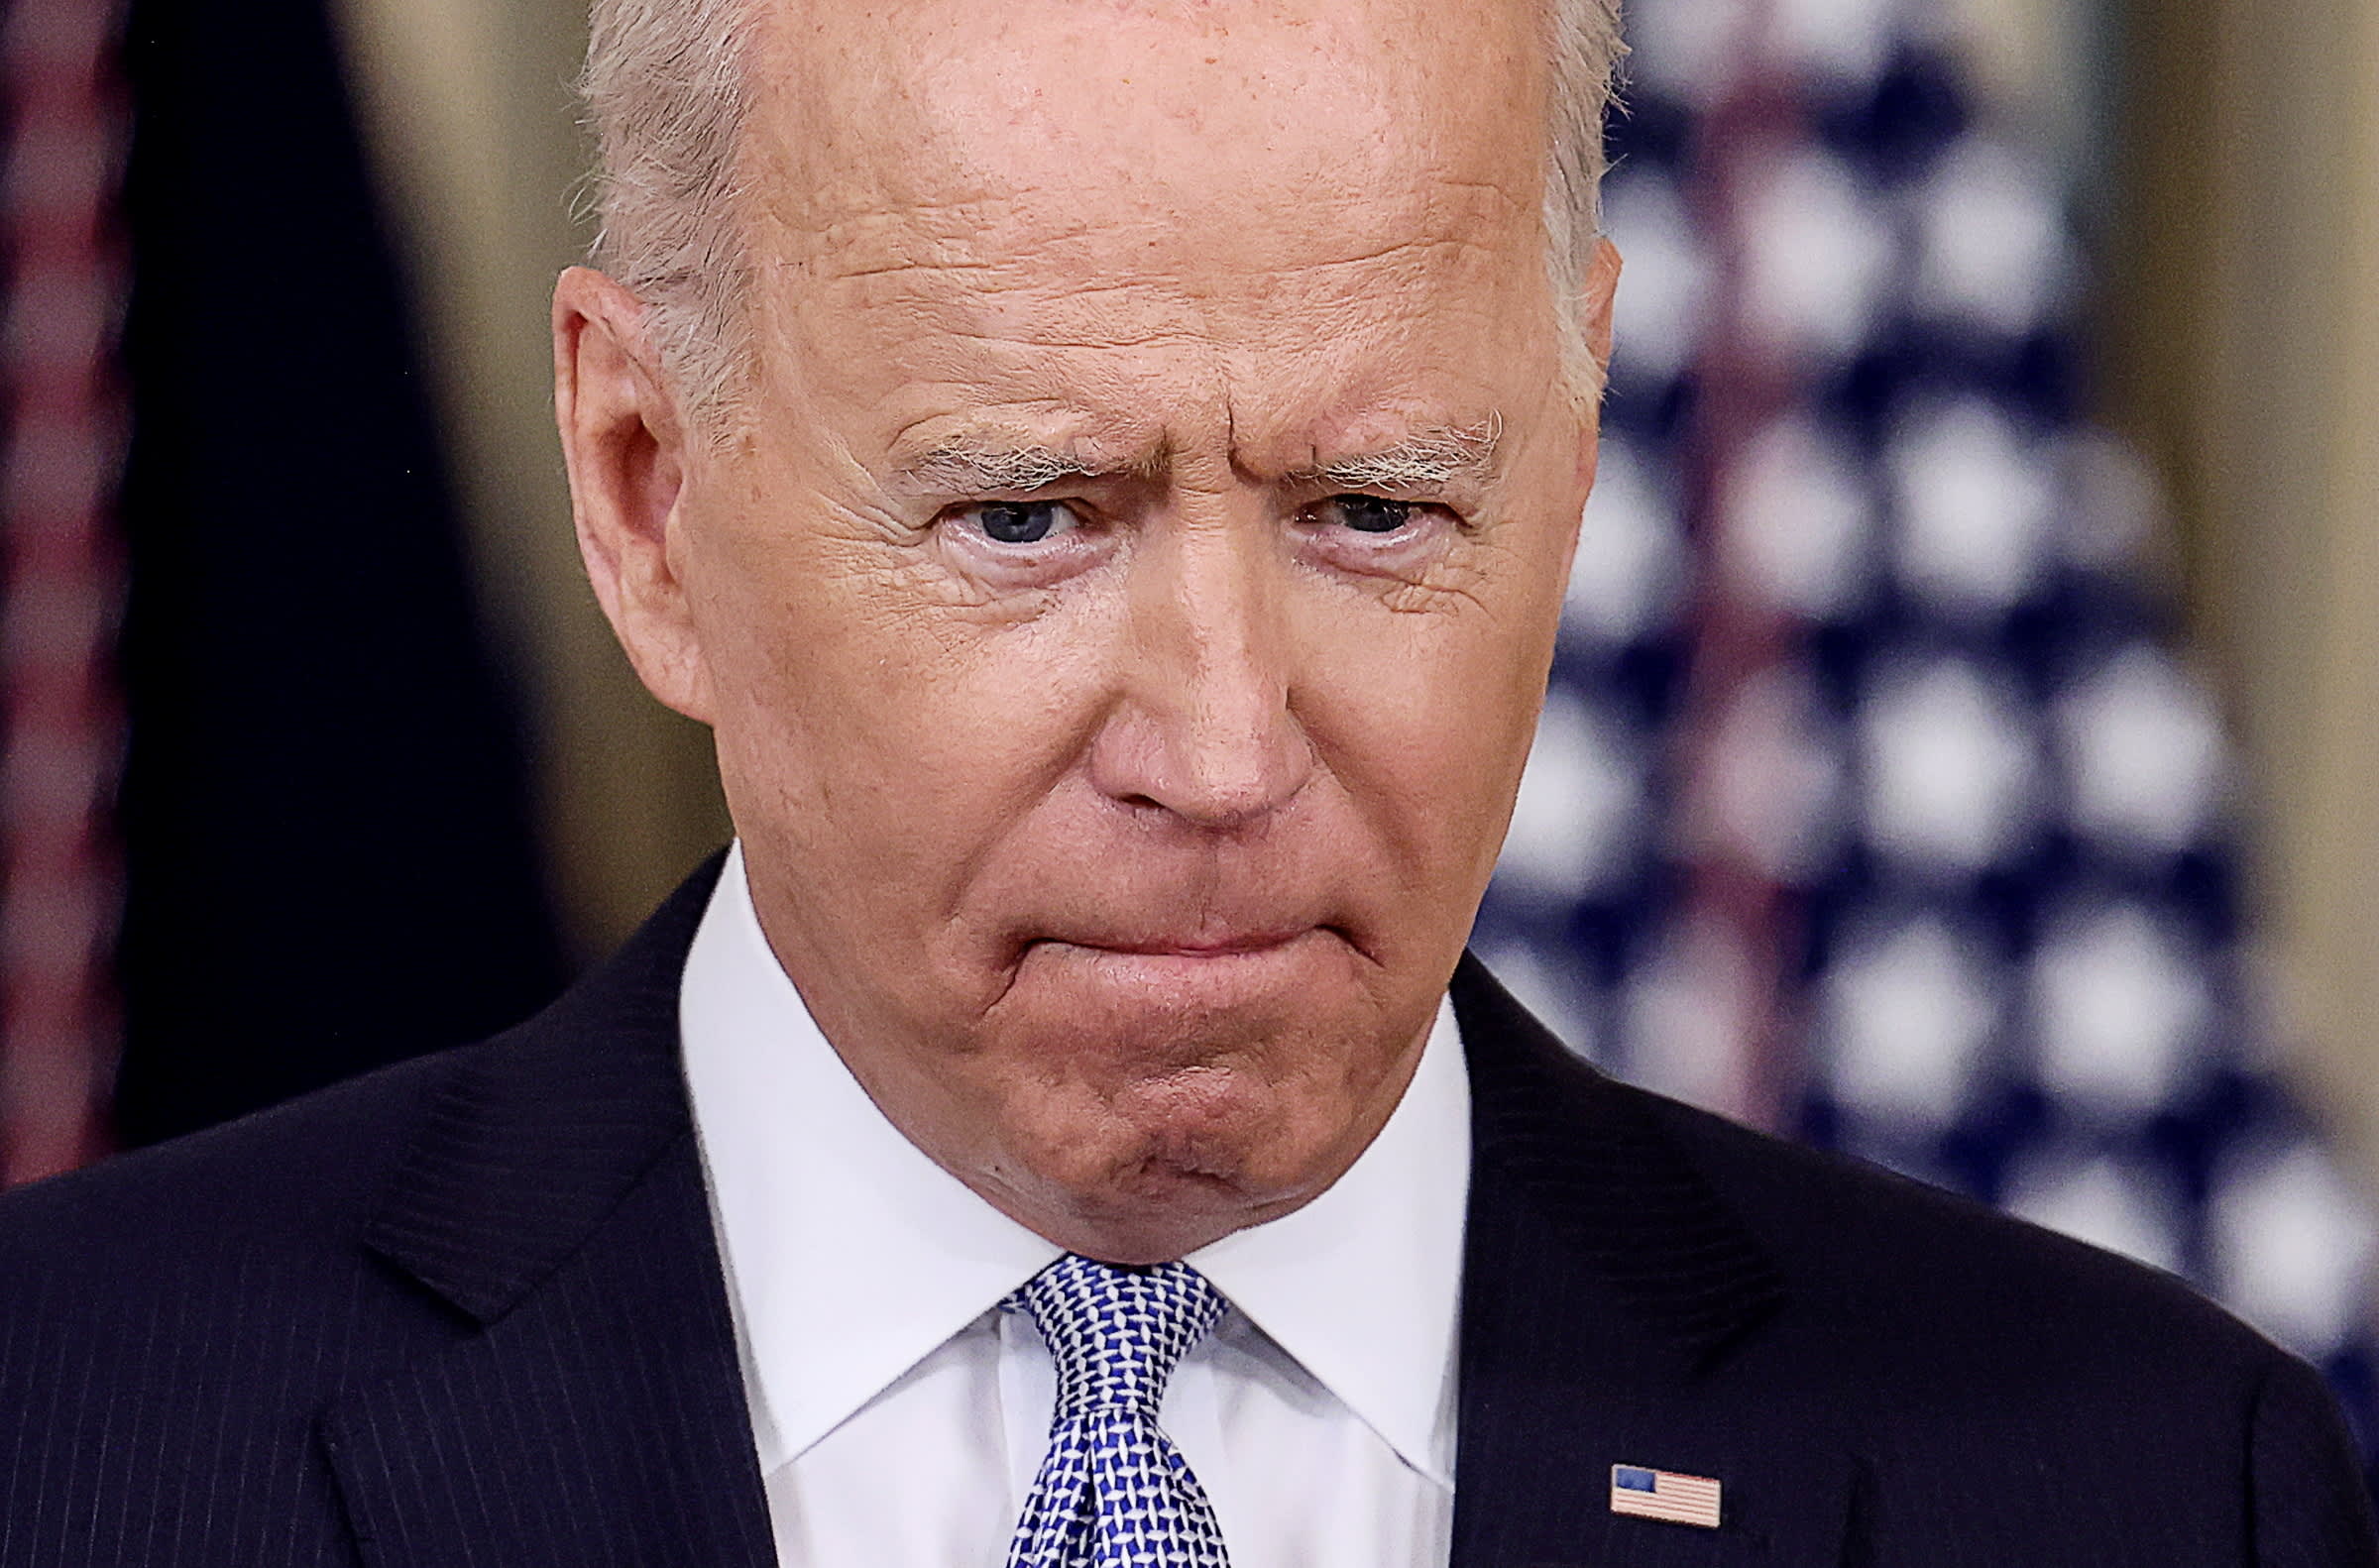 Op-ed: Biden needs to act now to shore up economic foreign policy to restore confidence in U.S. leadership thumbnail